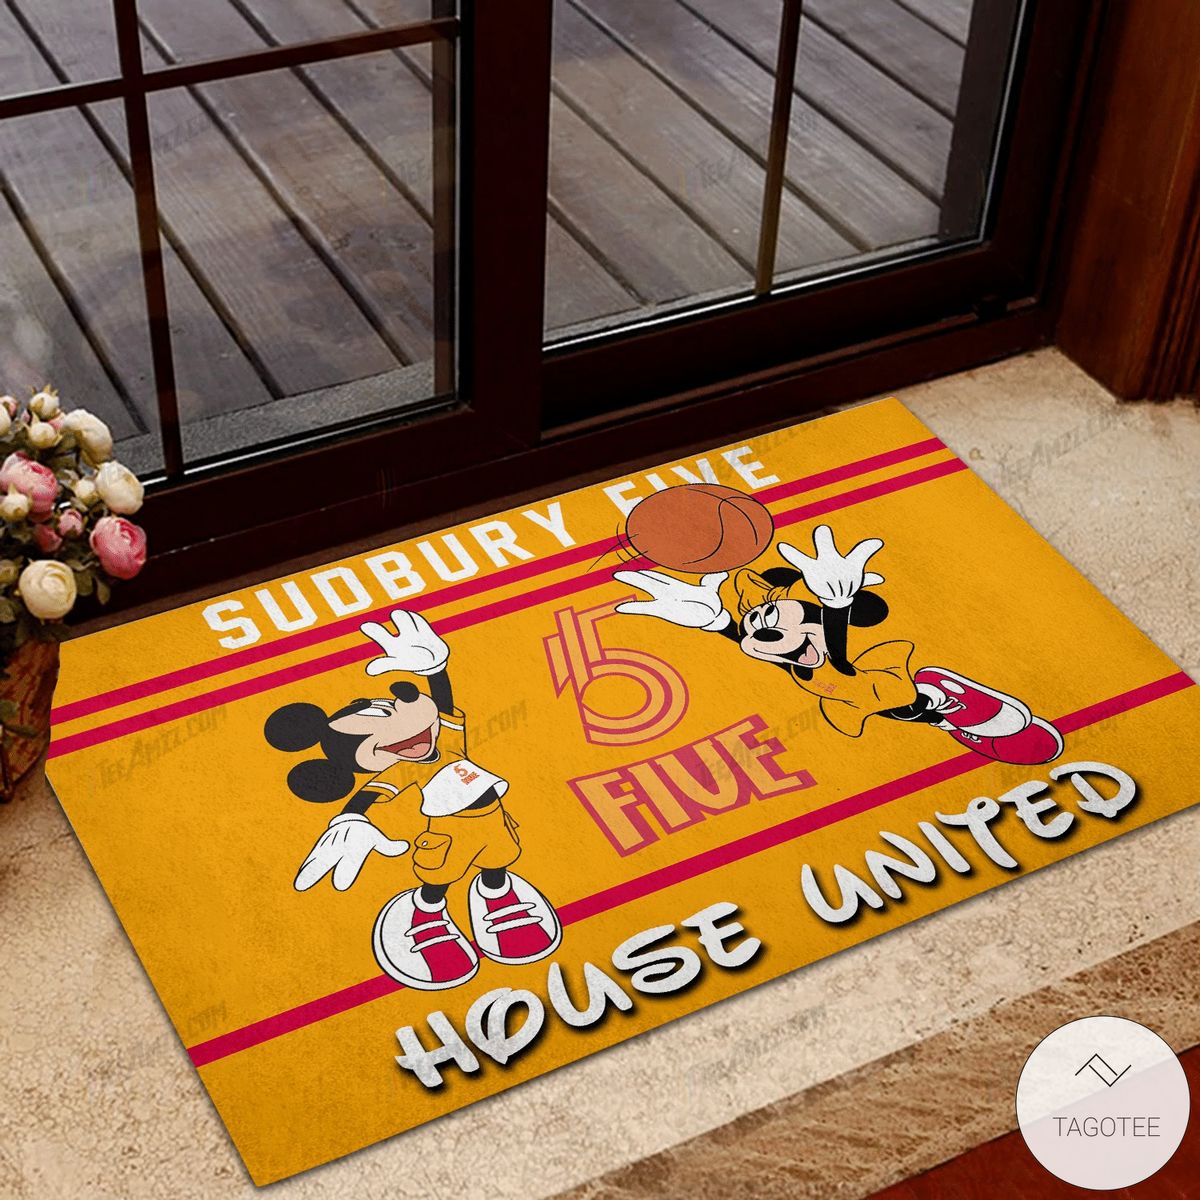 Sudbury Five House United Mickey Mouse And Minnie Mouse Doormat